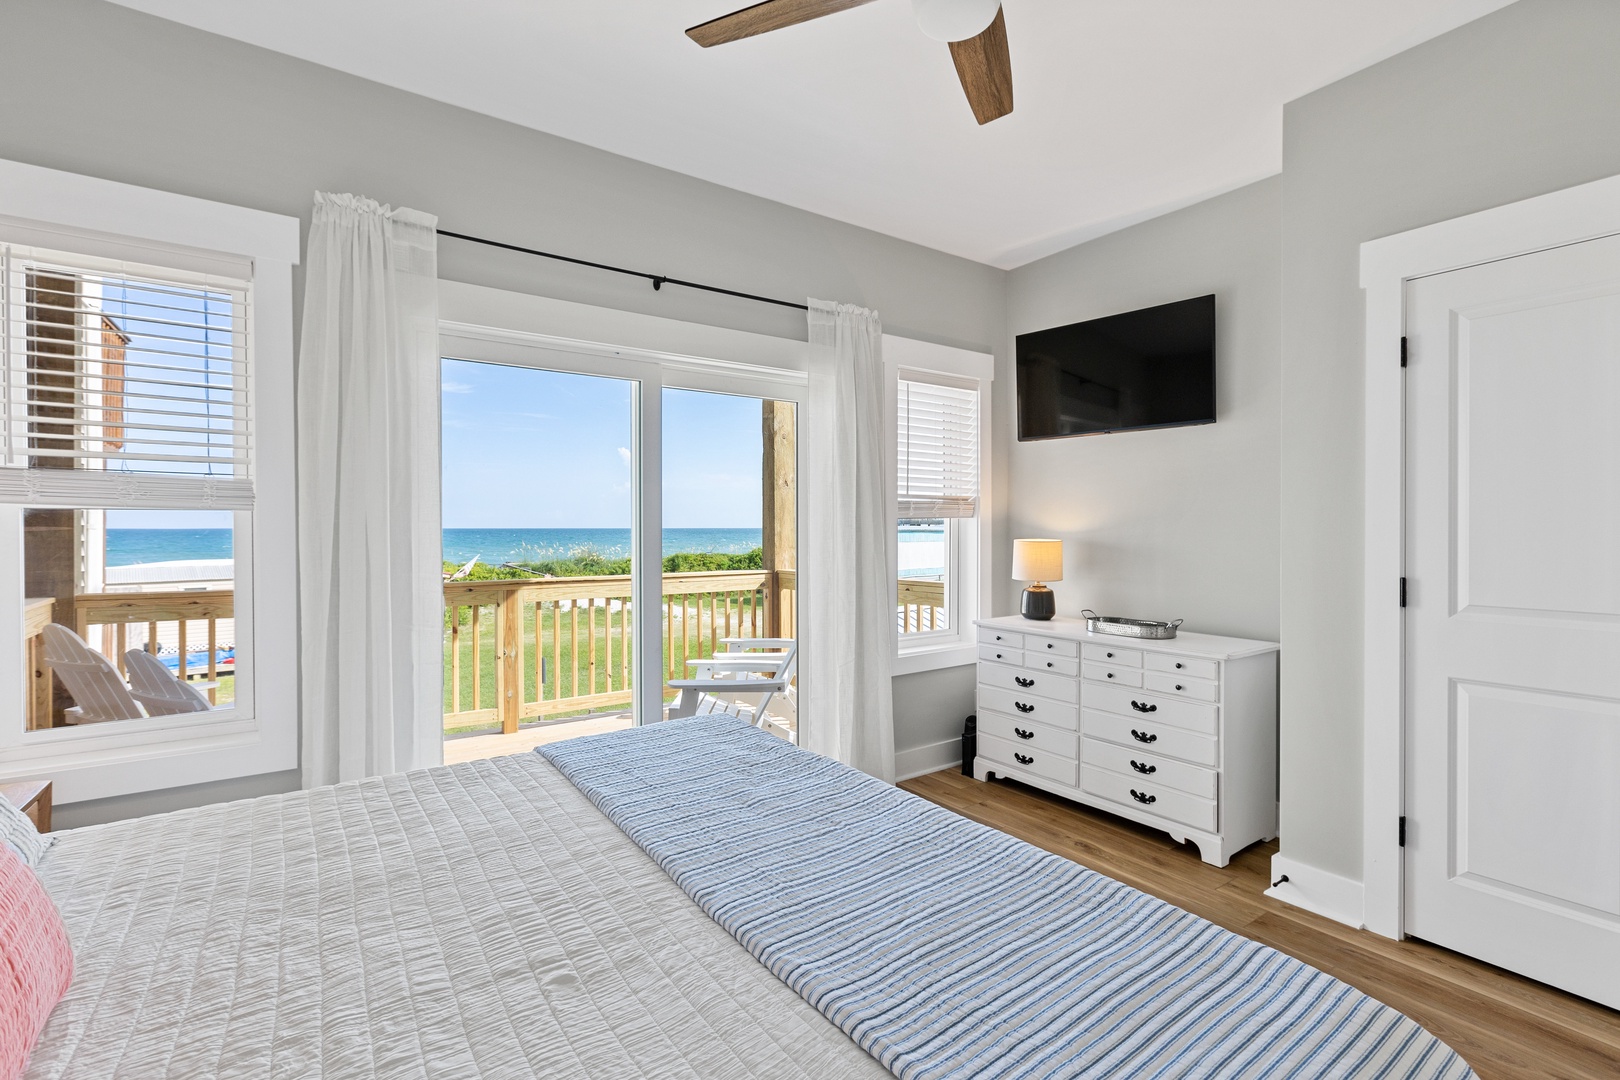 Bedroom 2 with a king-sized bed, Smart TV, and ocean view balcony access